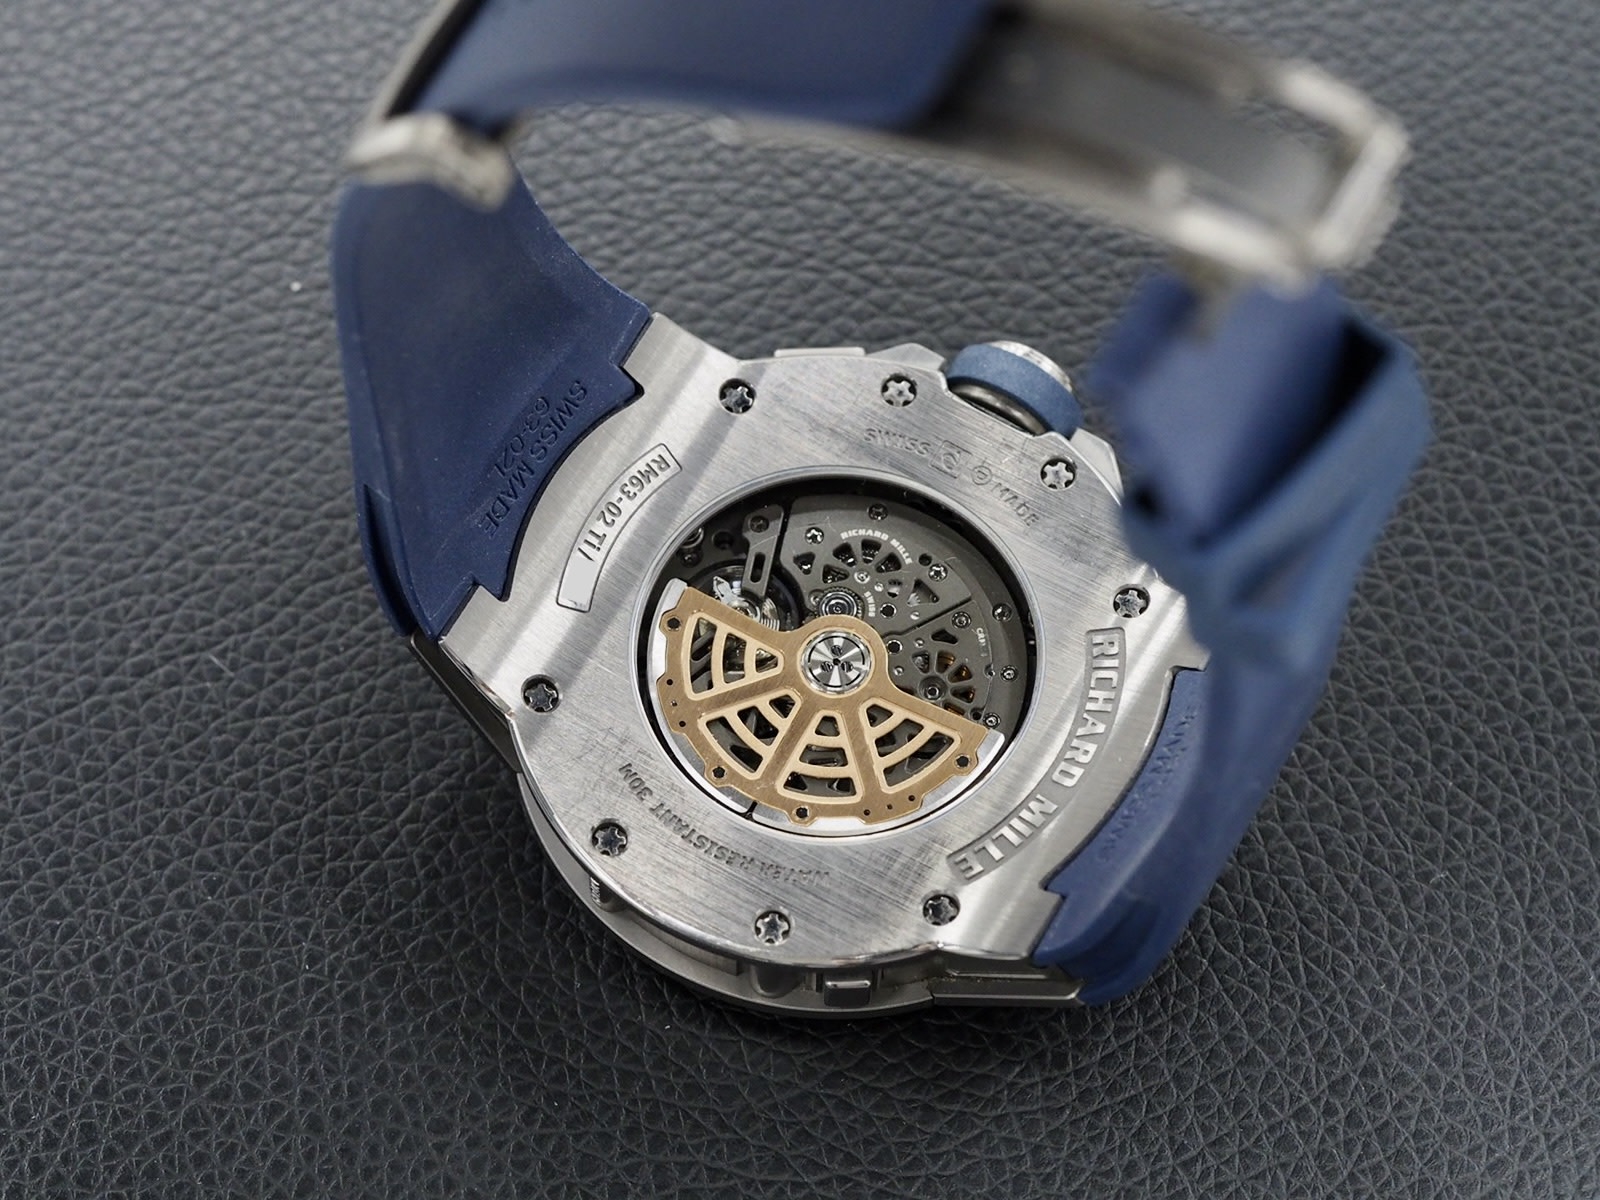 The RM63-02 combines Richard Mille's avante-garde design with a traditional and highly practical complication. 2